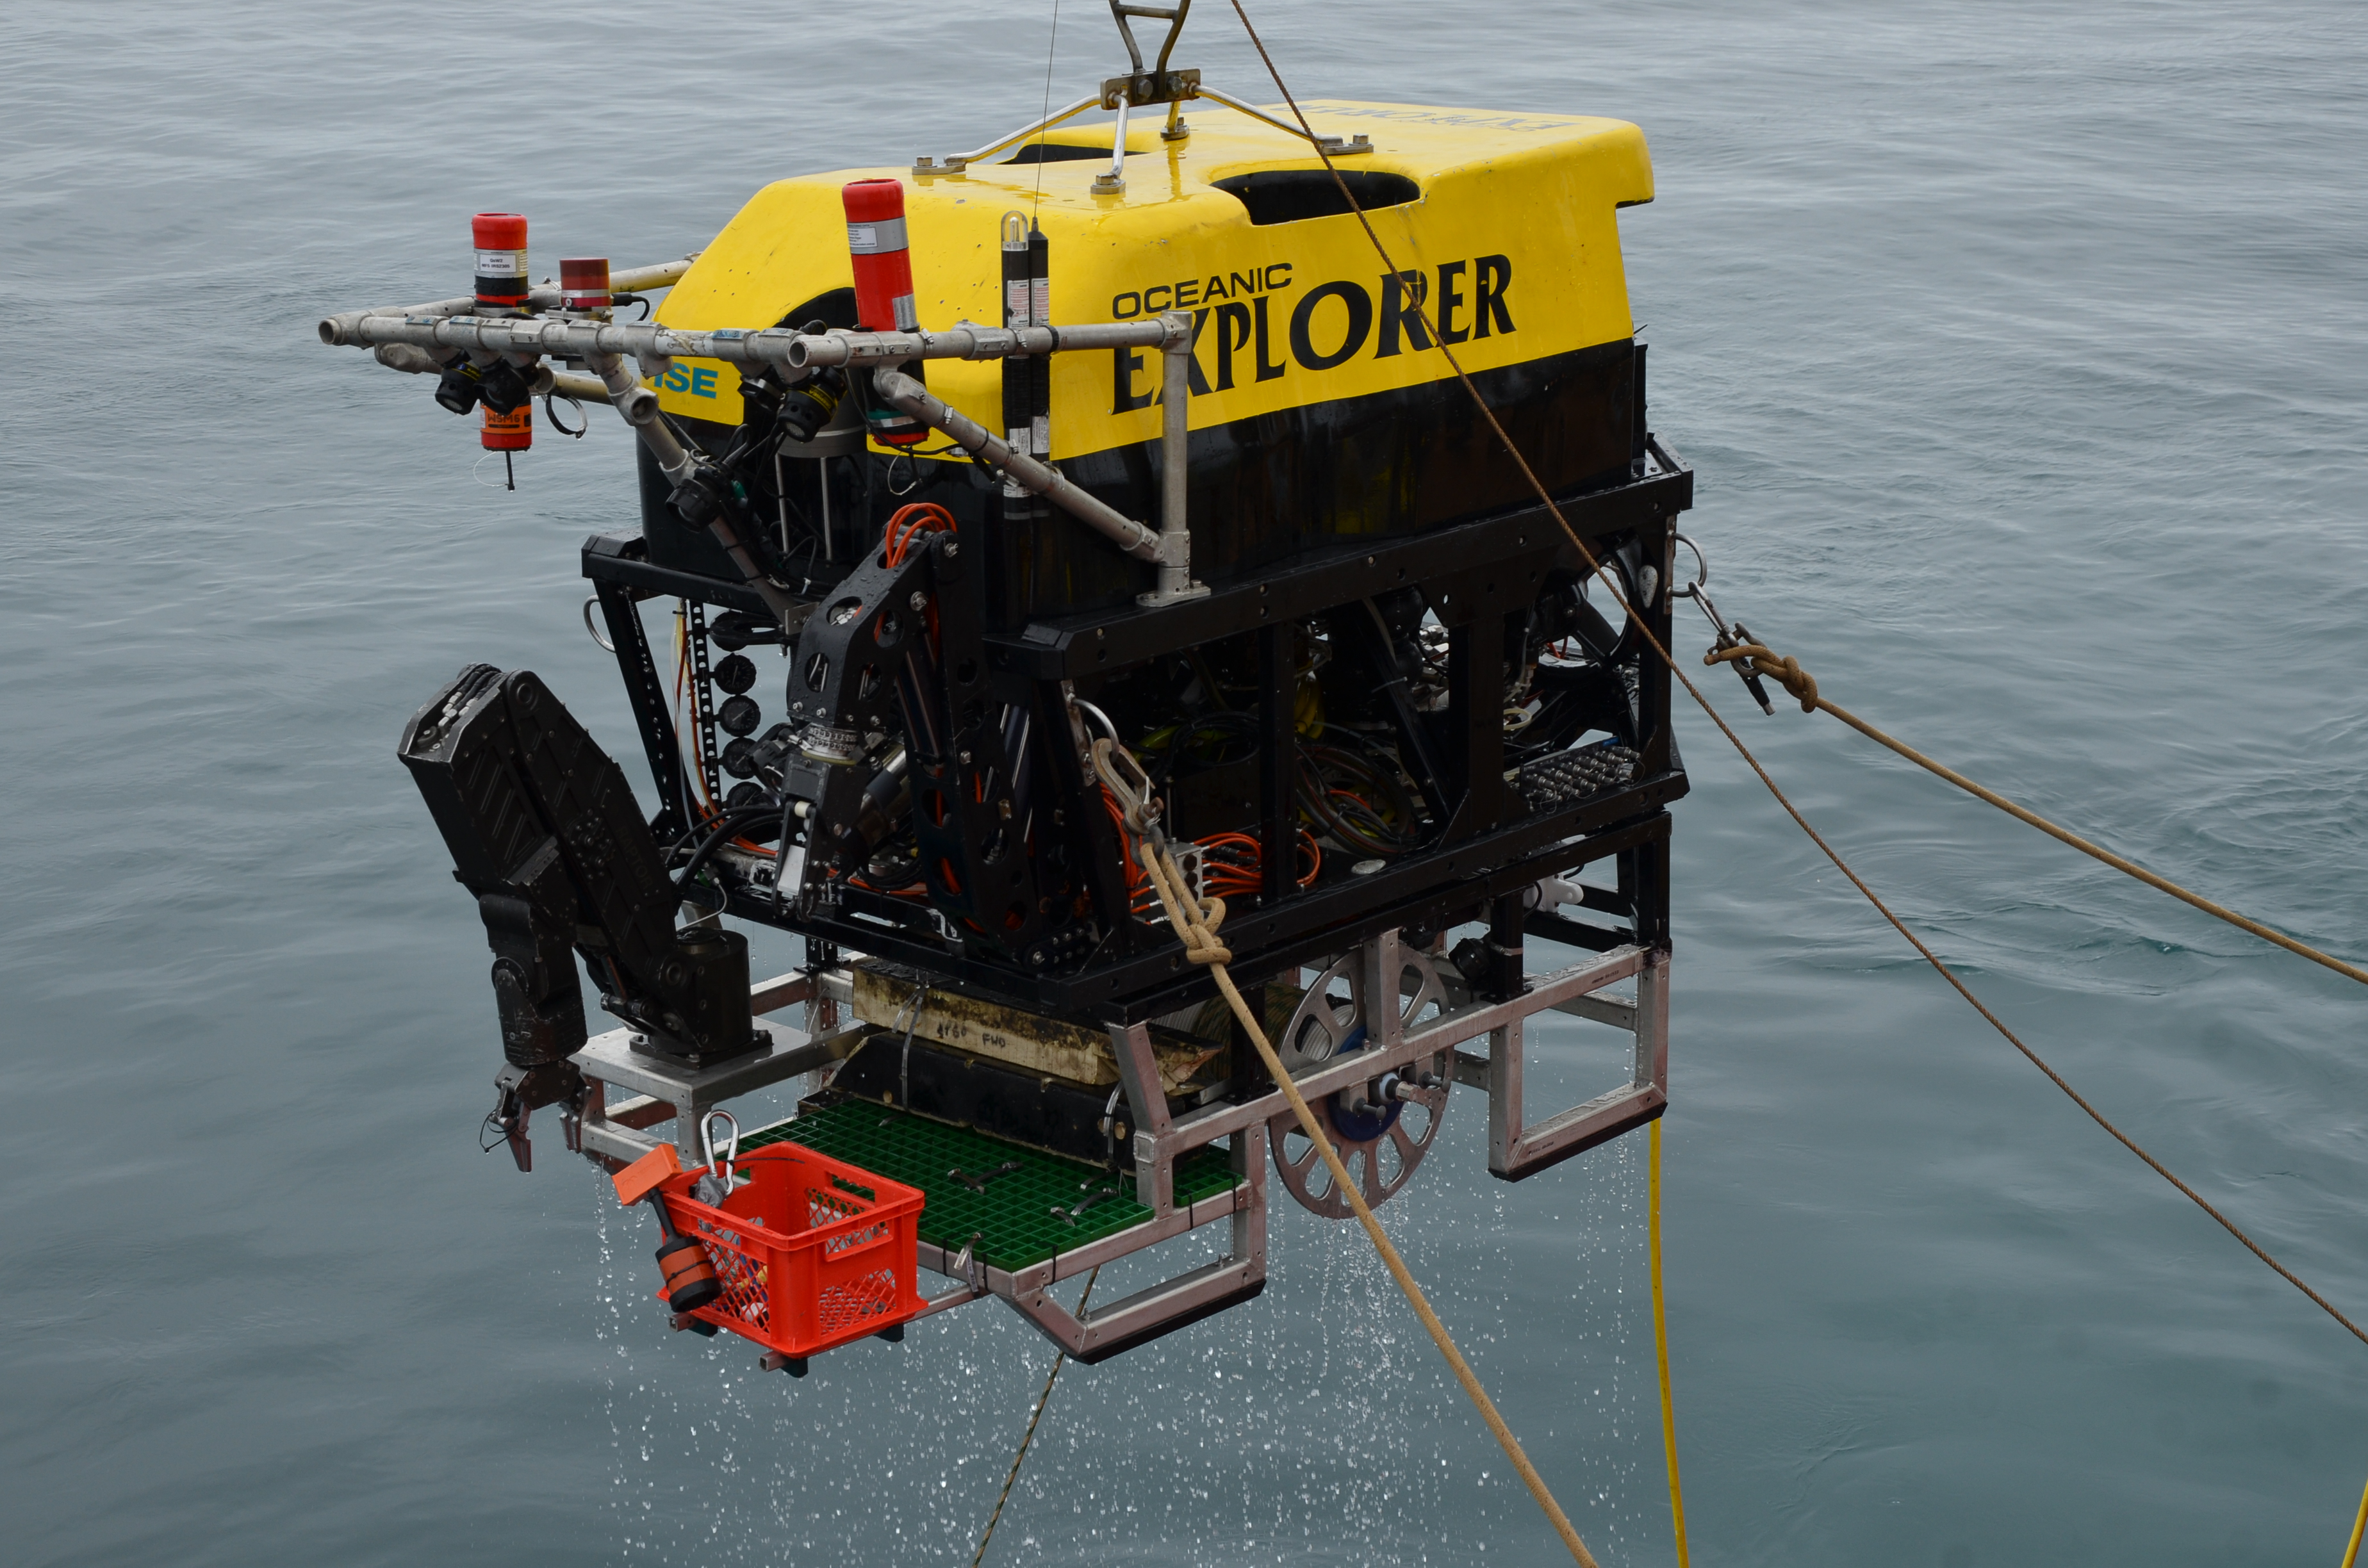 ROV Oceanic Explorer returns to the deck of the CCGS Tully, 10 May 2013. (Depth: 1265m)